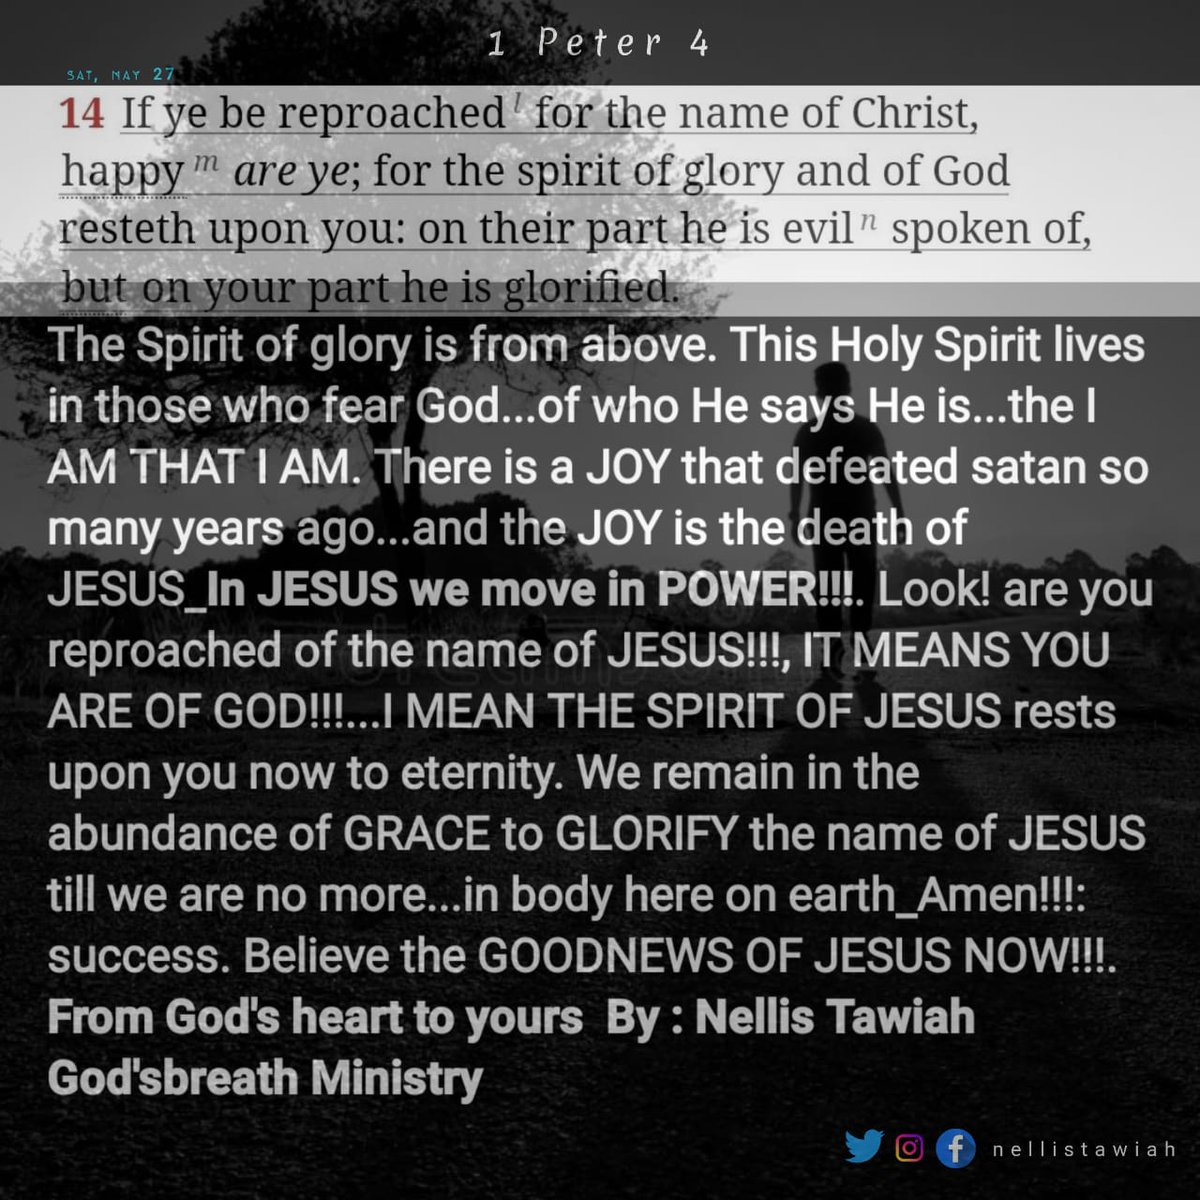 *In JESUS we move in POWER!!!*

#Twitter #newpost #justbelieve #dailybreath #scripture #christian #dailyword